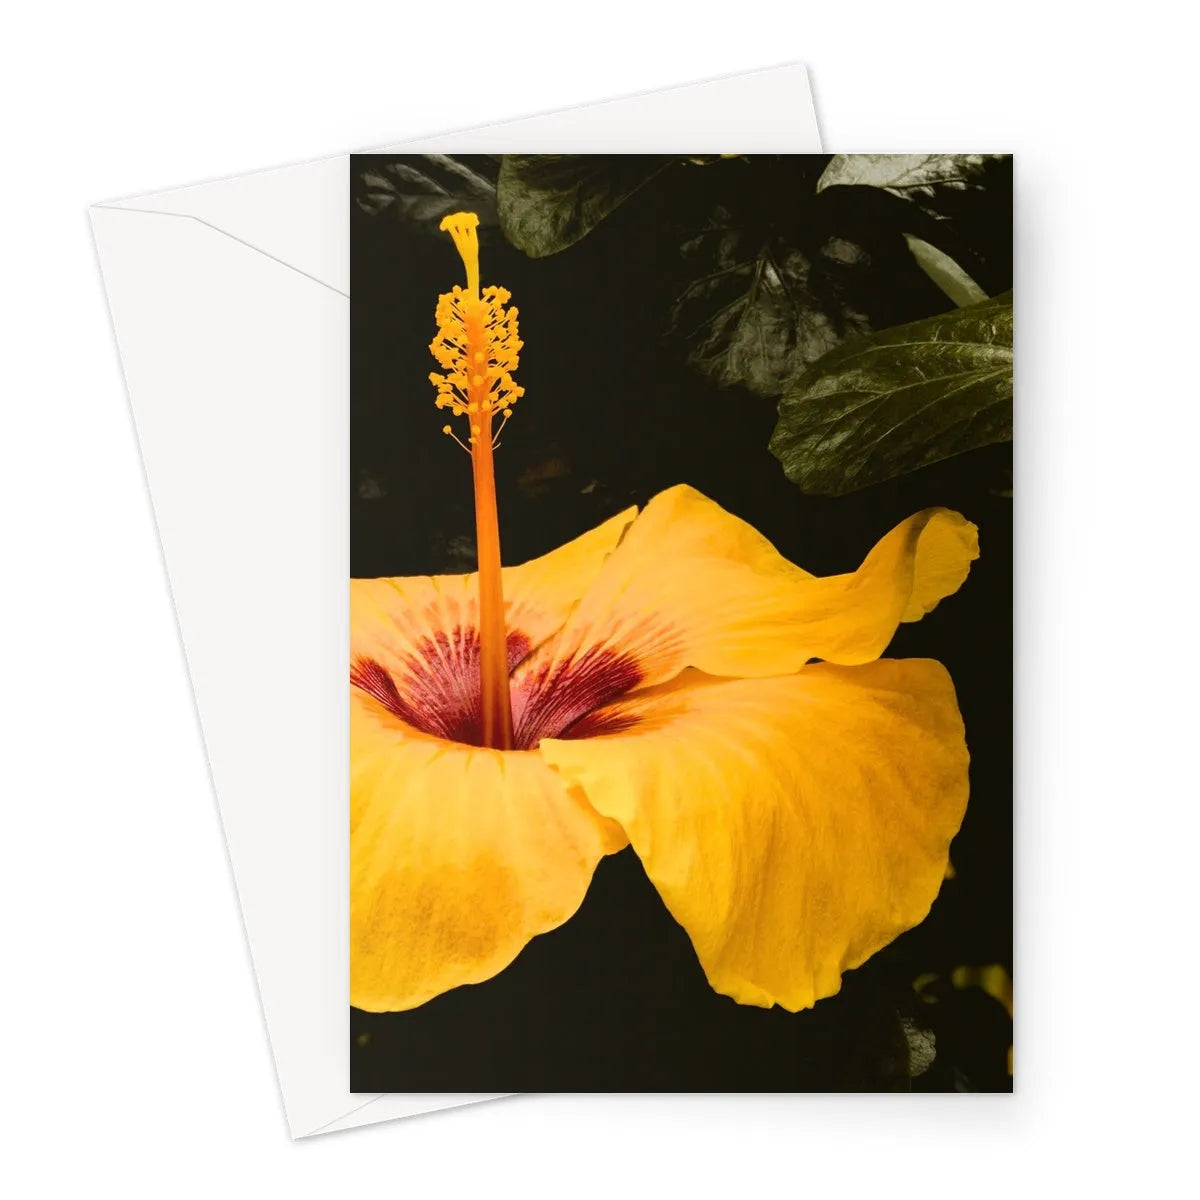 For Sita - Yellow Hibiscus Hoi An Greeting Card - A5 Portrait / 1 Card - Greeting & Note Cards - Aesthetic Art